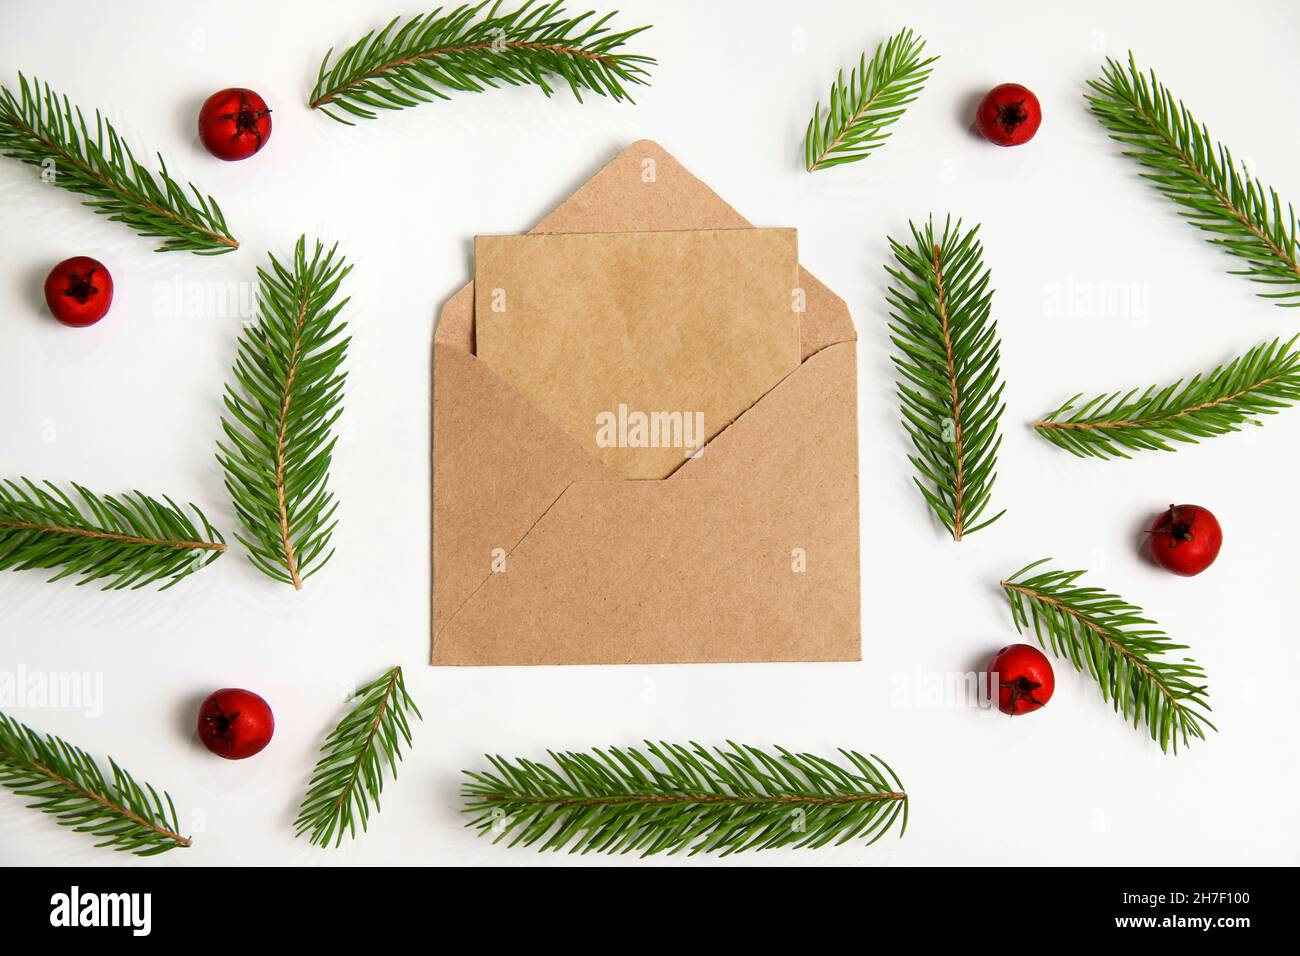 Closeup eco craft envelope, letter to Santa. Frame of fir branch or spruce branch and red berries isolated on white background. Fir tree branches Stock Photo